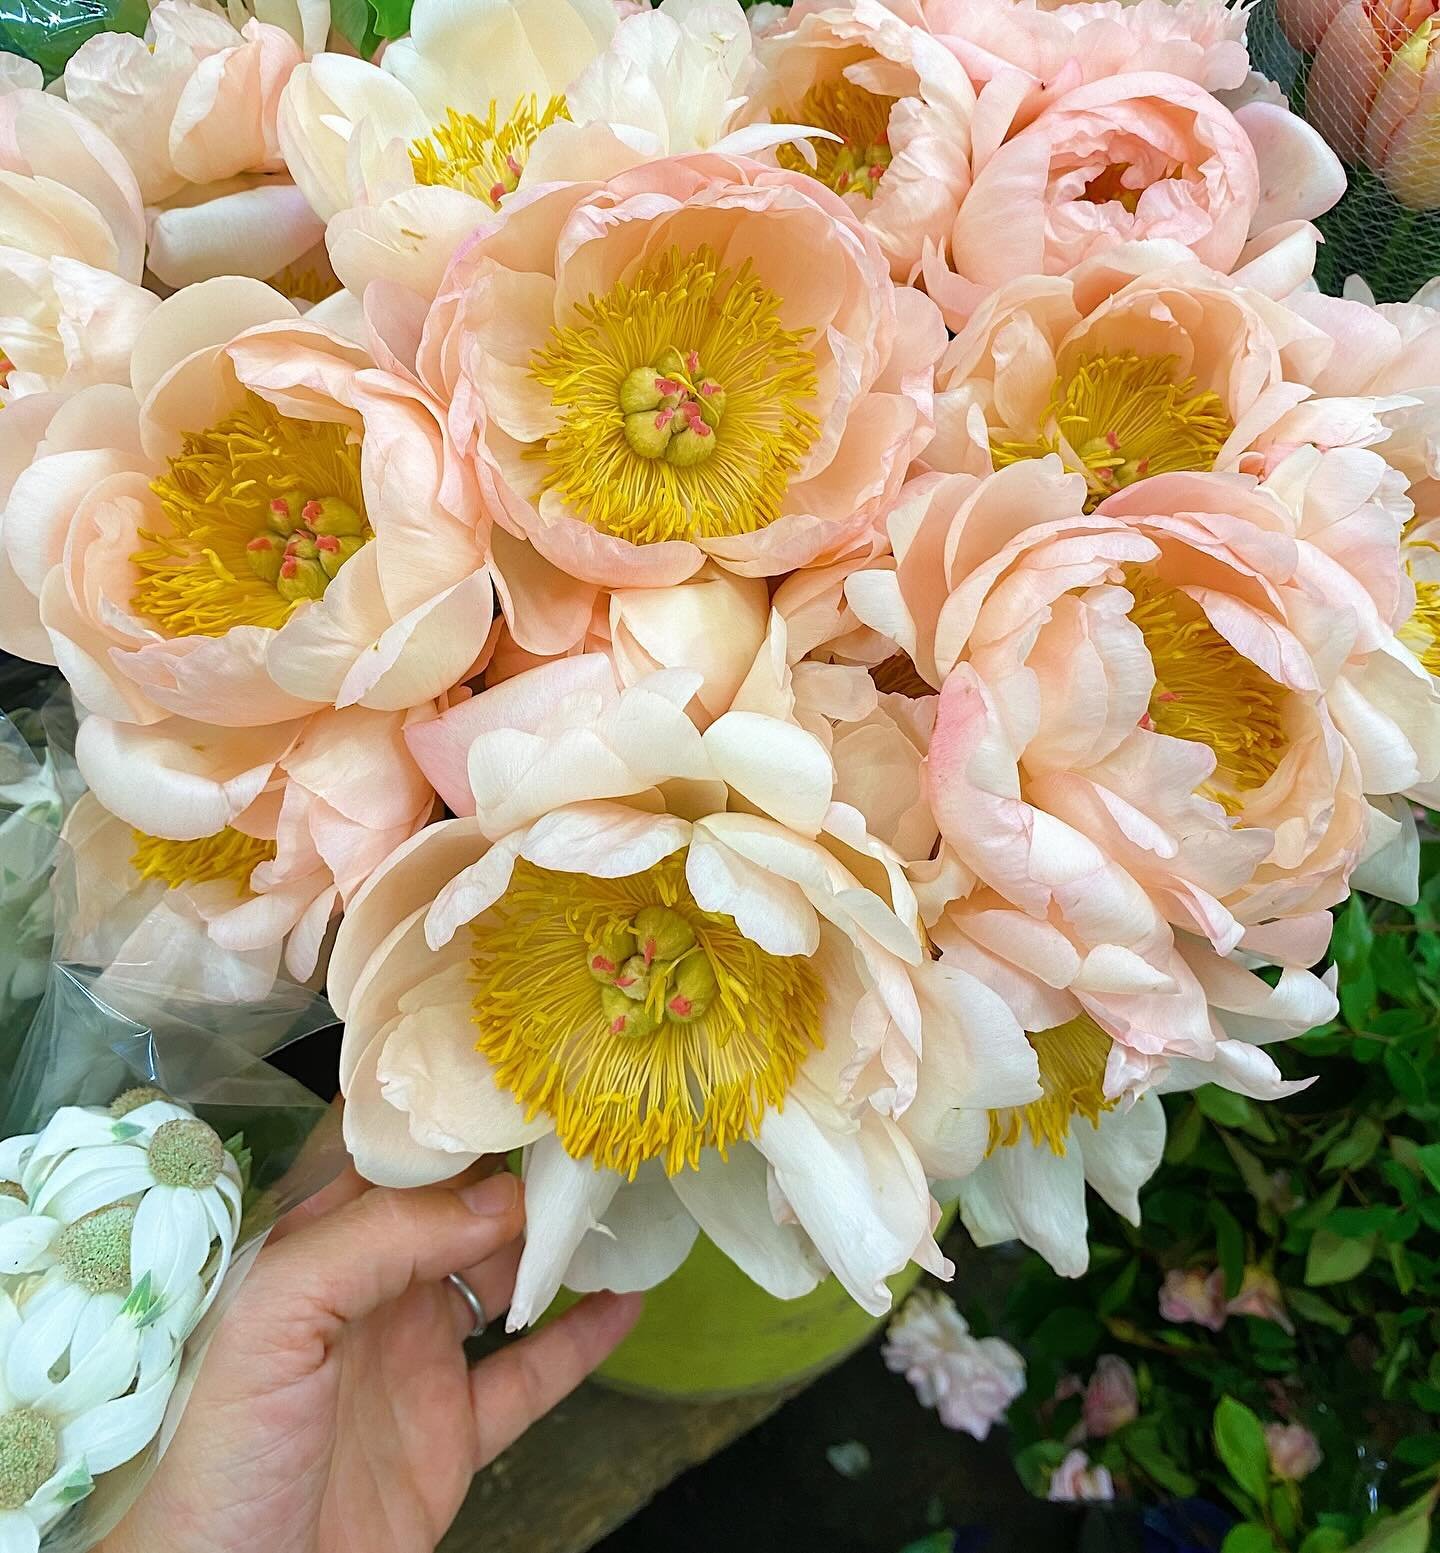 ✨ Peonies ✨

They&rsquo;re here! The market is currently bursting with these beautiful blooms and I&rsquo;m here for it! 

Peonies are typically in season during late spring to early summer, usually from April to June, depending on your location. The